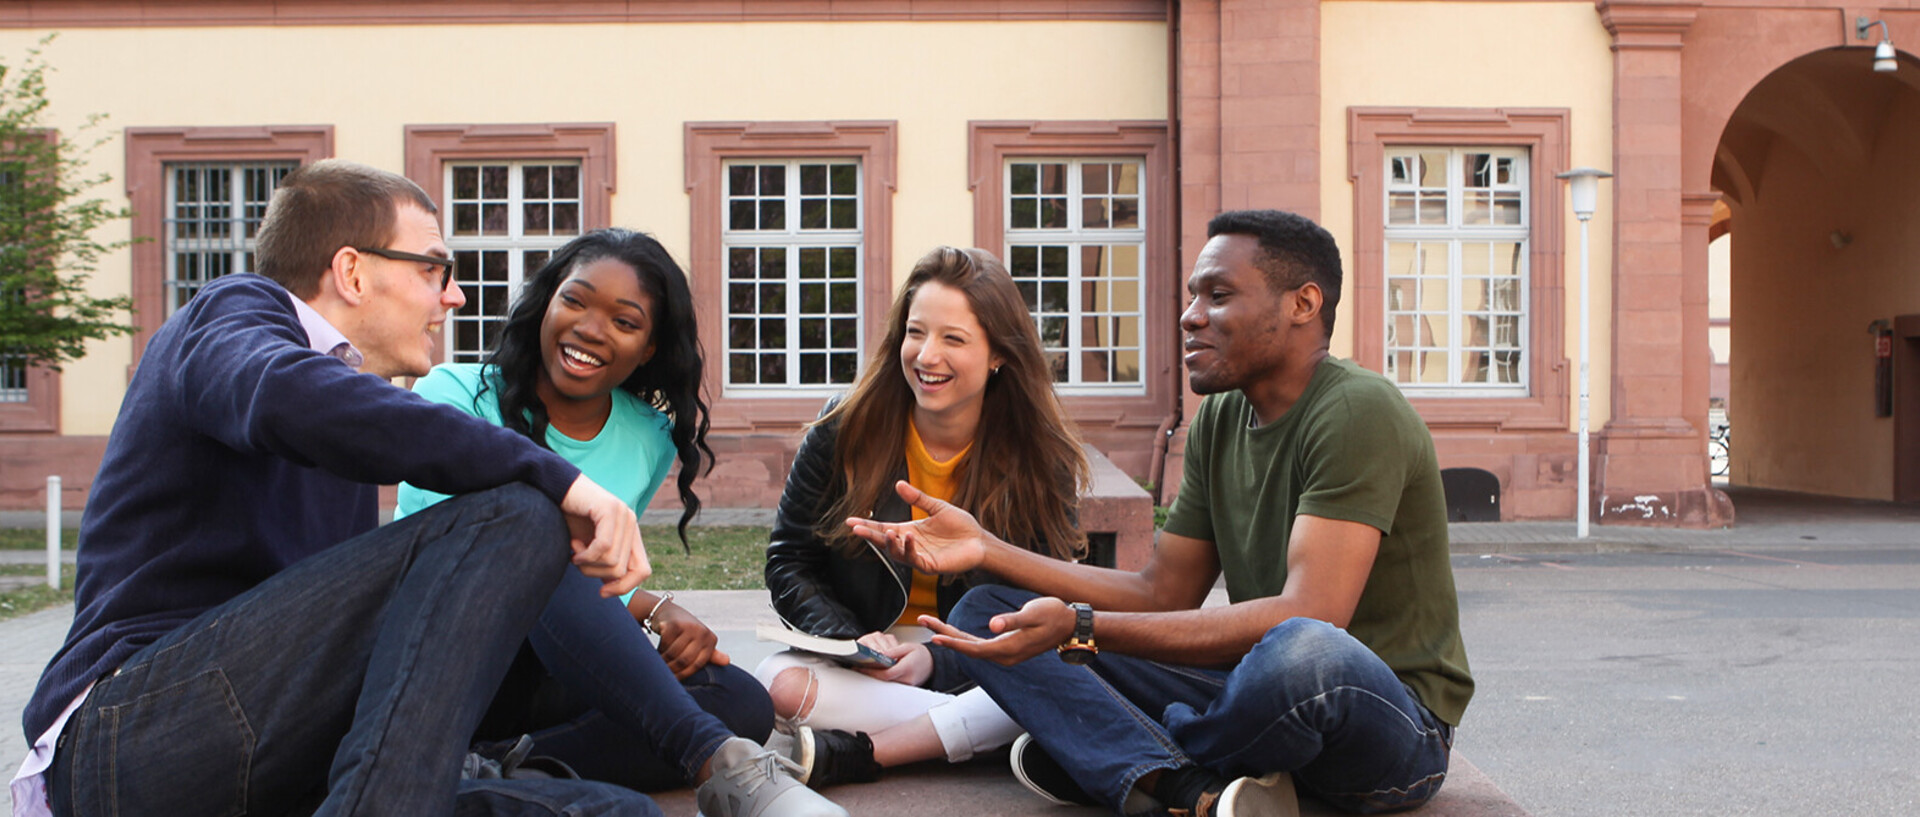 Group of students sitting on courtyard outside the palace